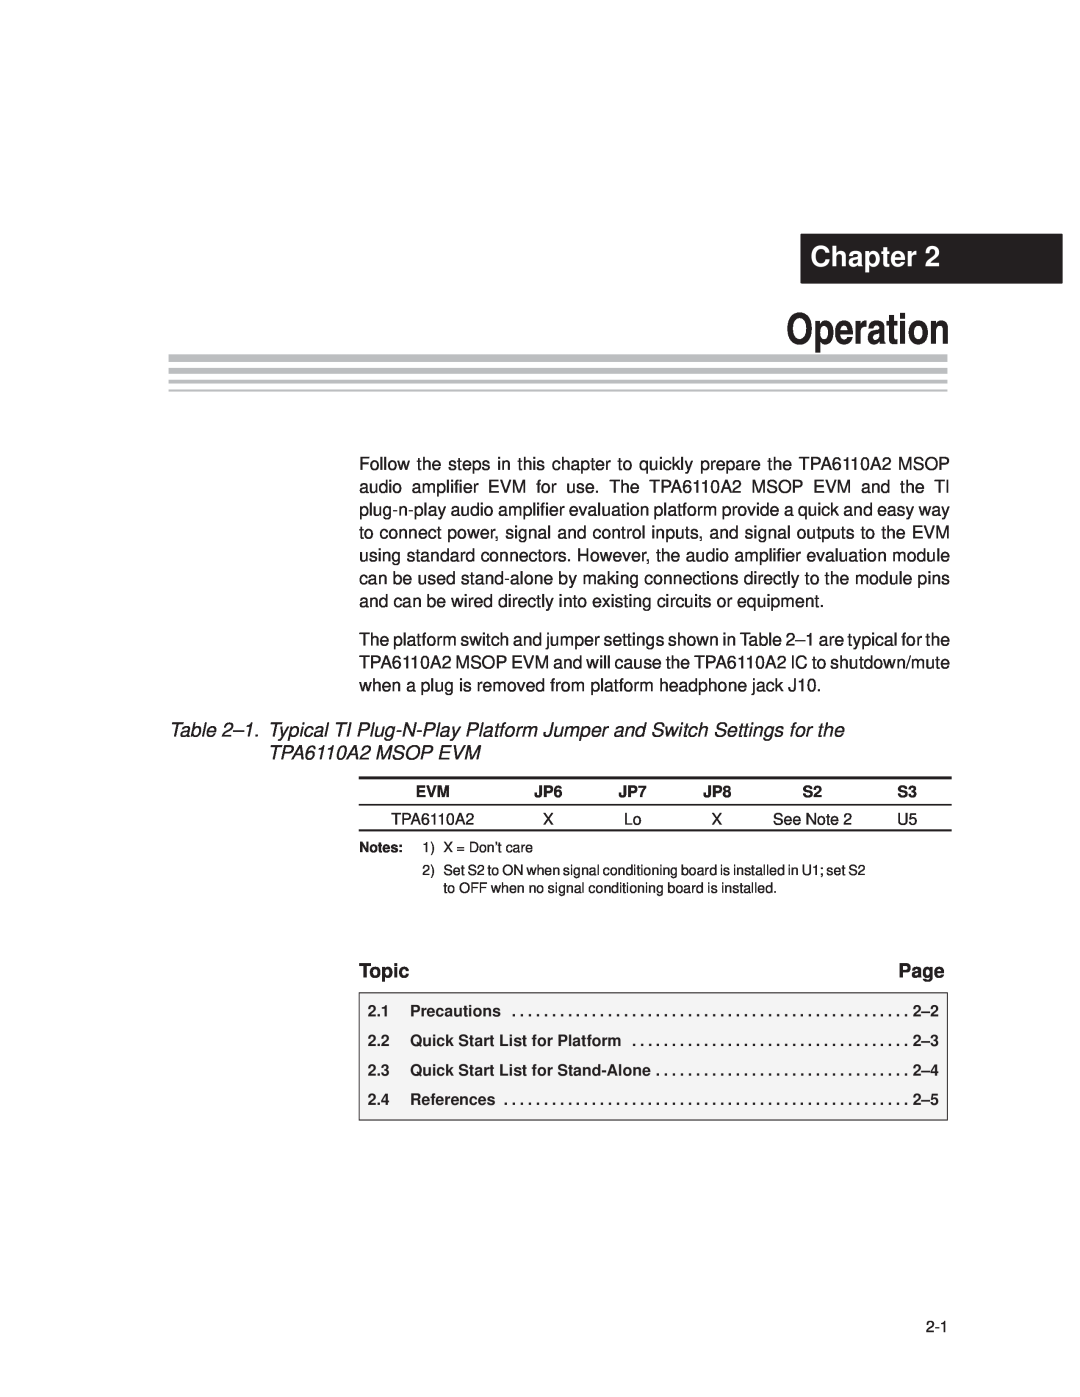 Texas Instruments TPA6110A2 MSOP manual Operation, Chapter, Page, Topic 